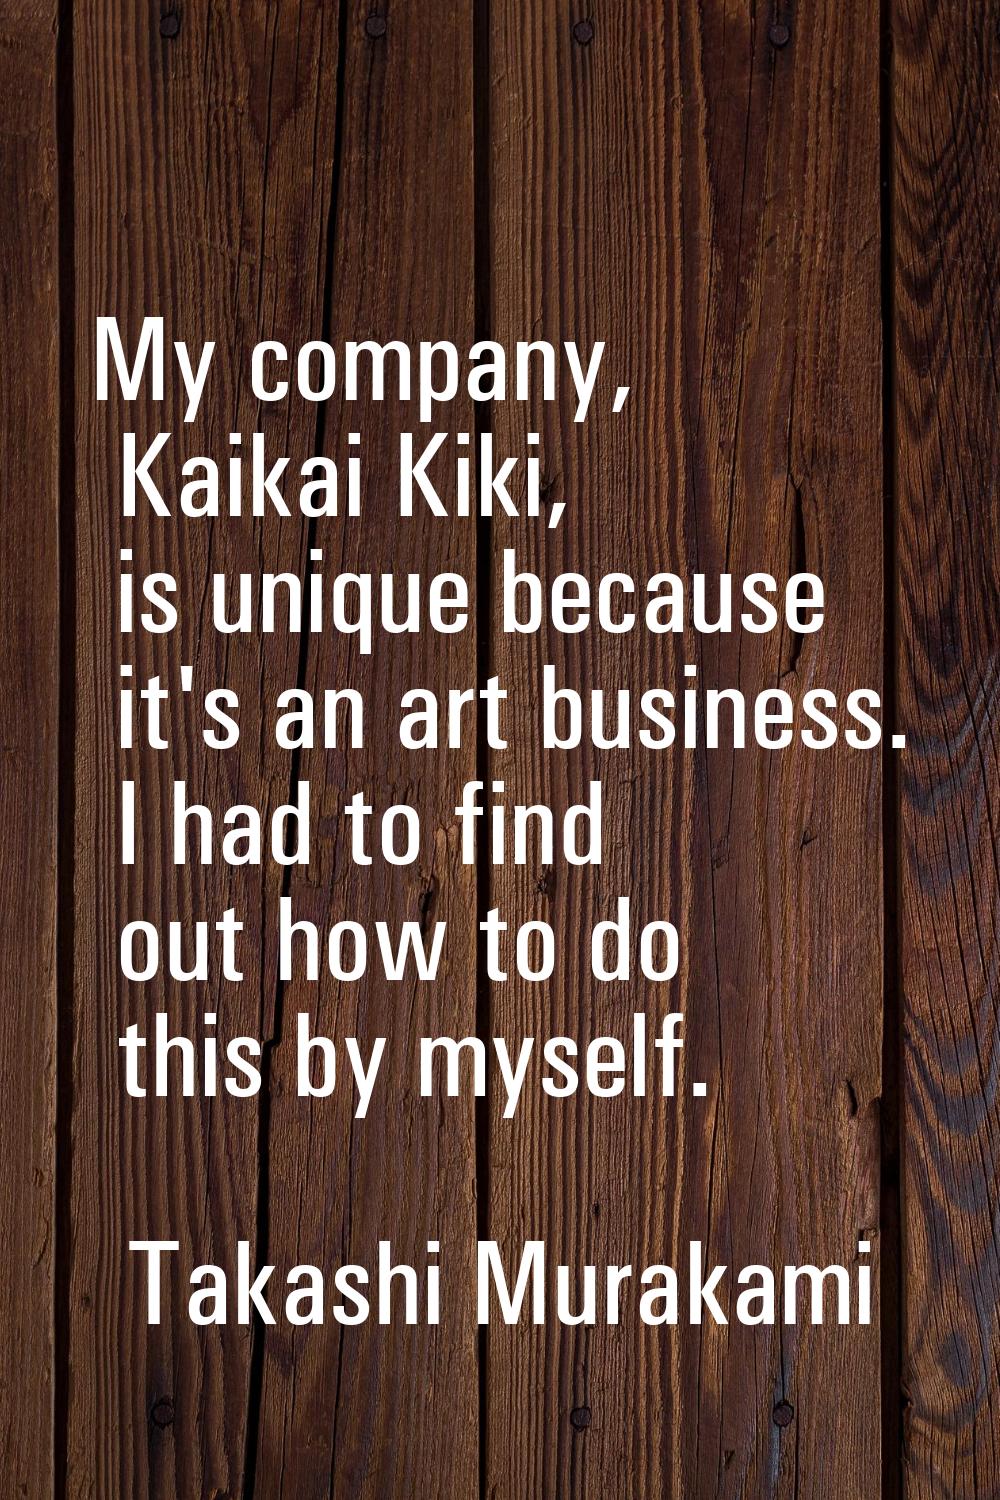 My company, Kaikai Kiki, is unique because it's an art business. I had to find out how to do this b